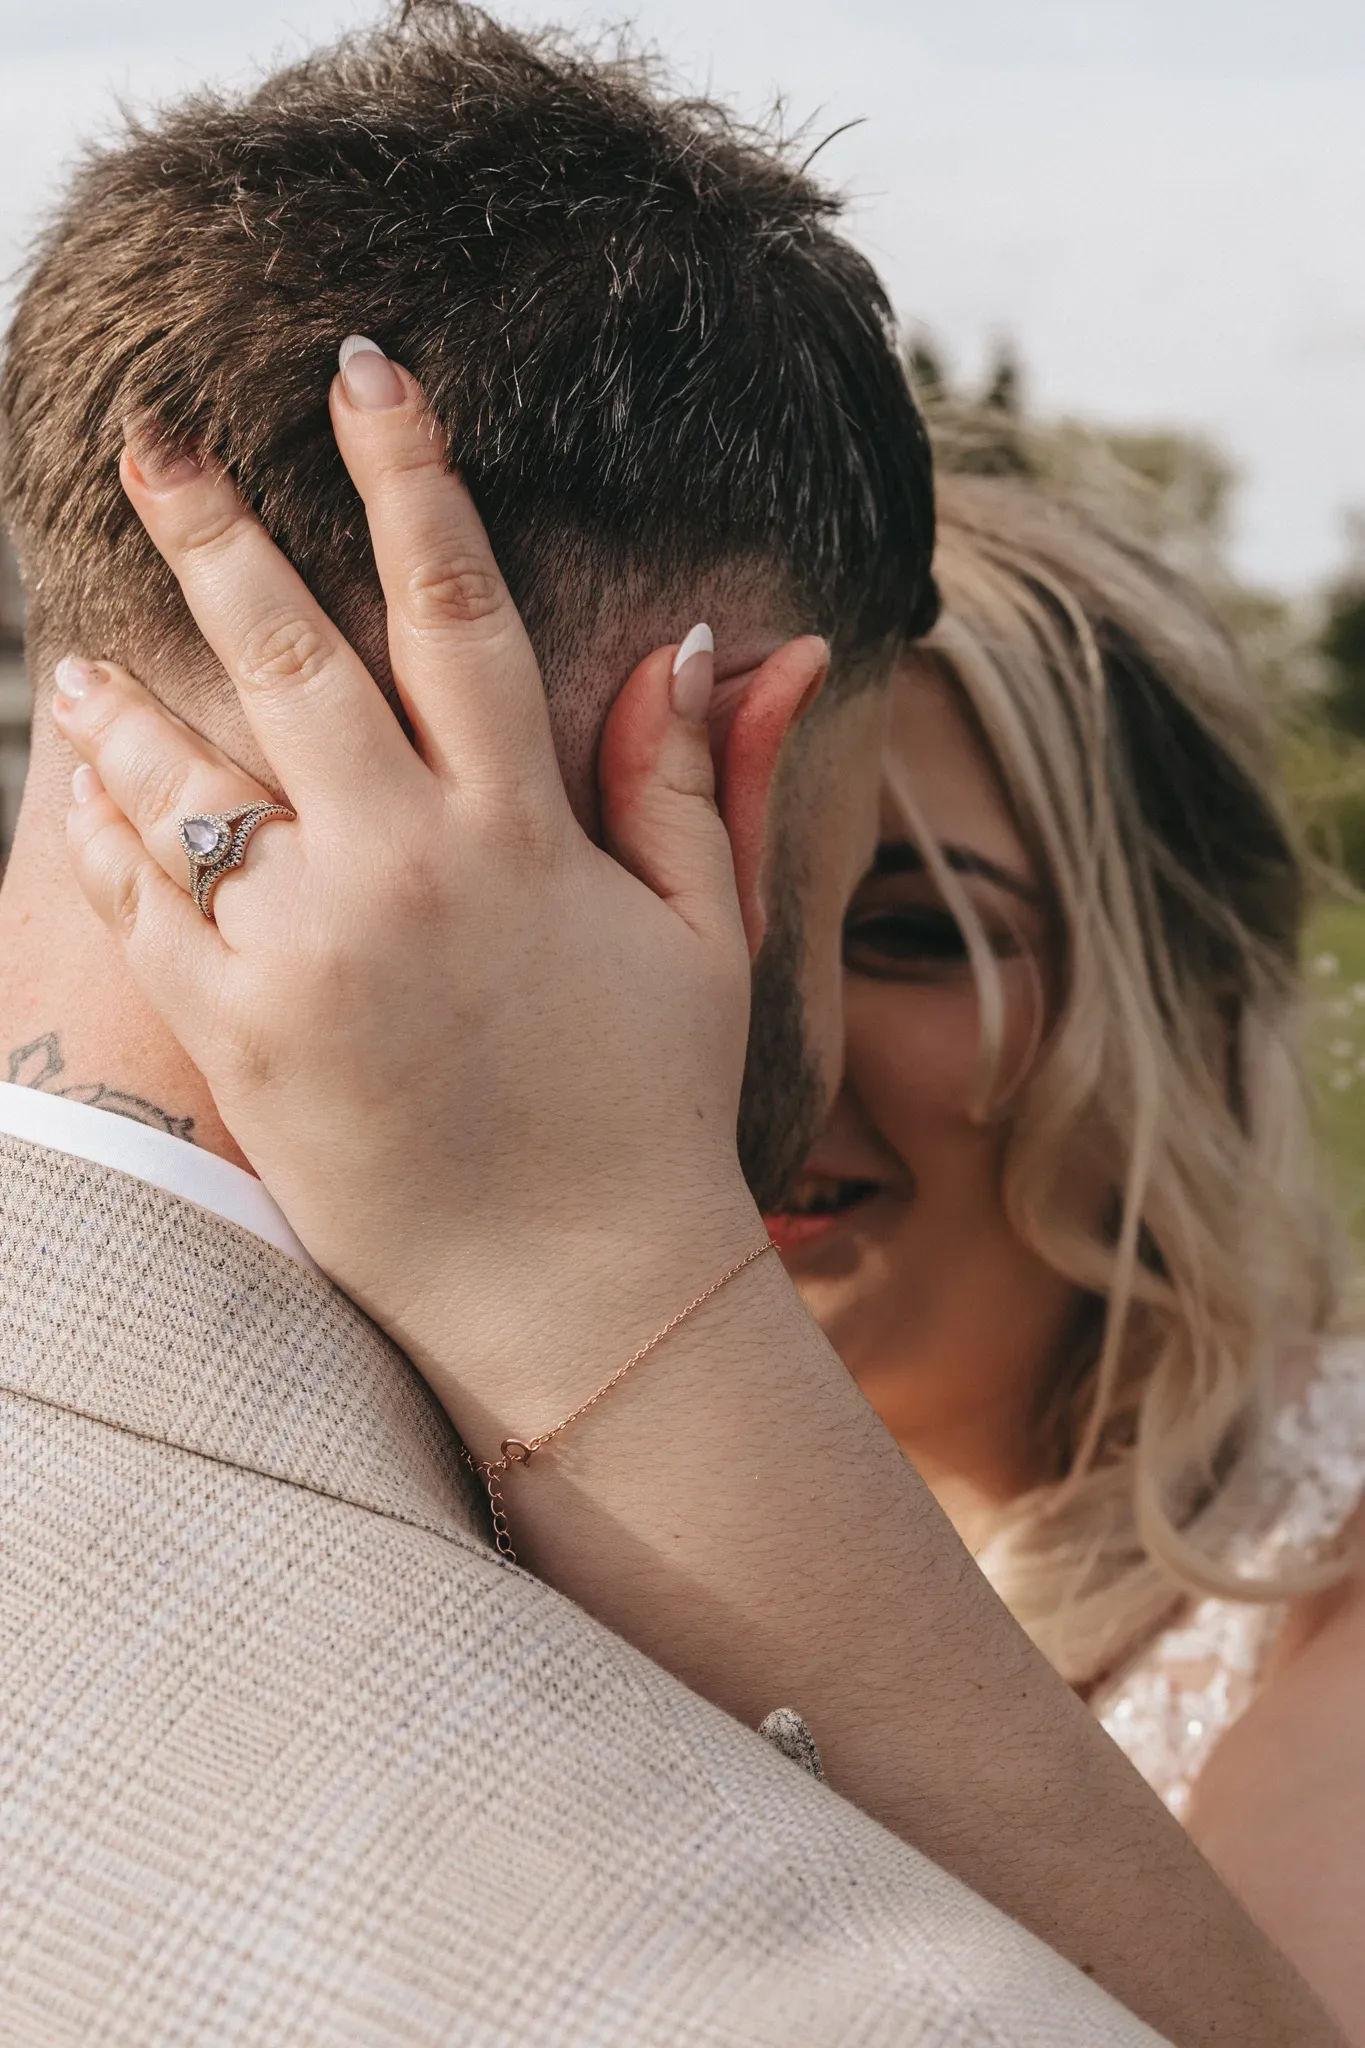 A bride, joyfully blurred in the background, holds the head of the groom, whose back is to the camera. the bride's hand, adorned with a diamond ring, gently touches his short, dark hair. warm, soft lighting enhances the intimate moment.